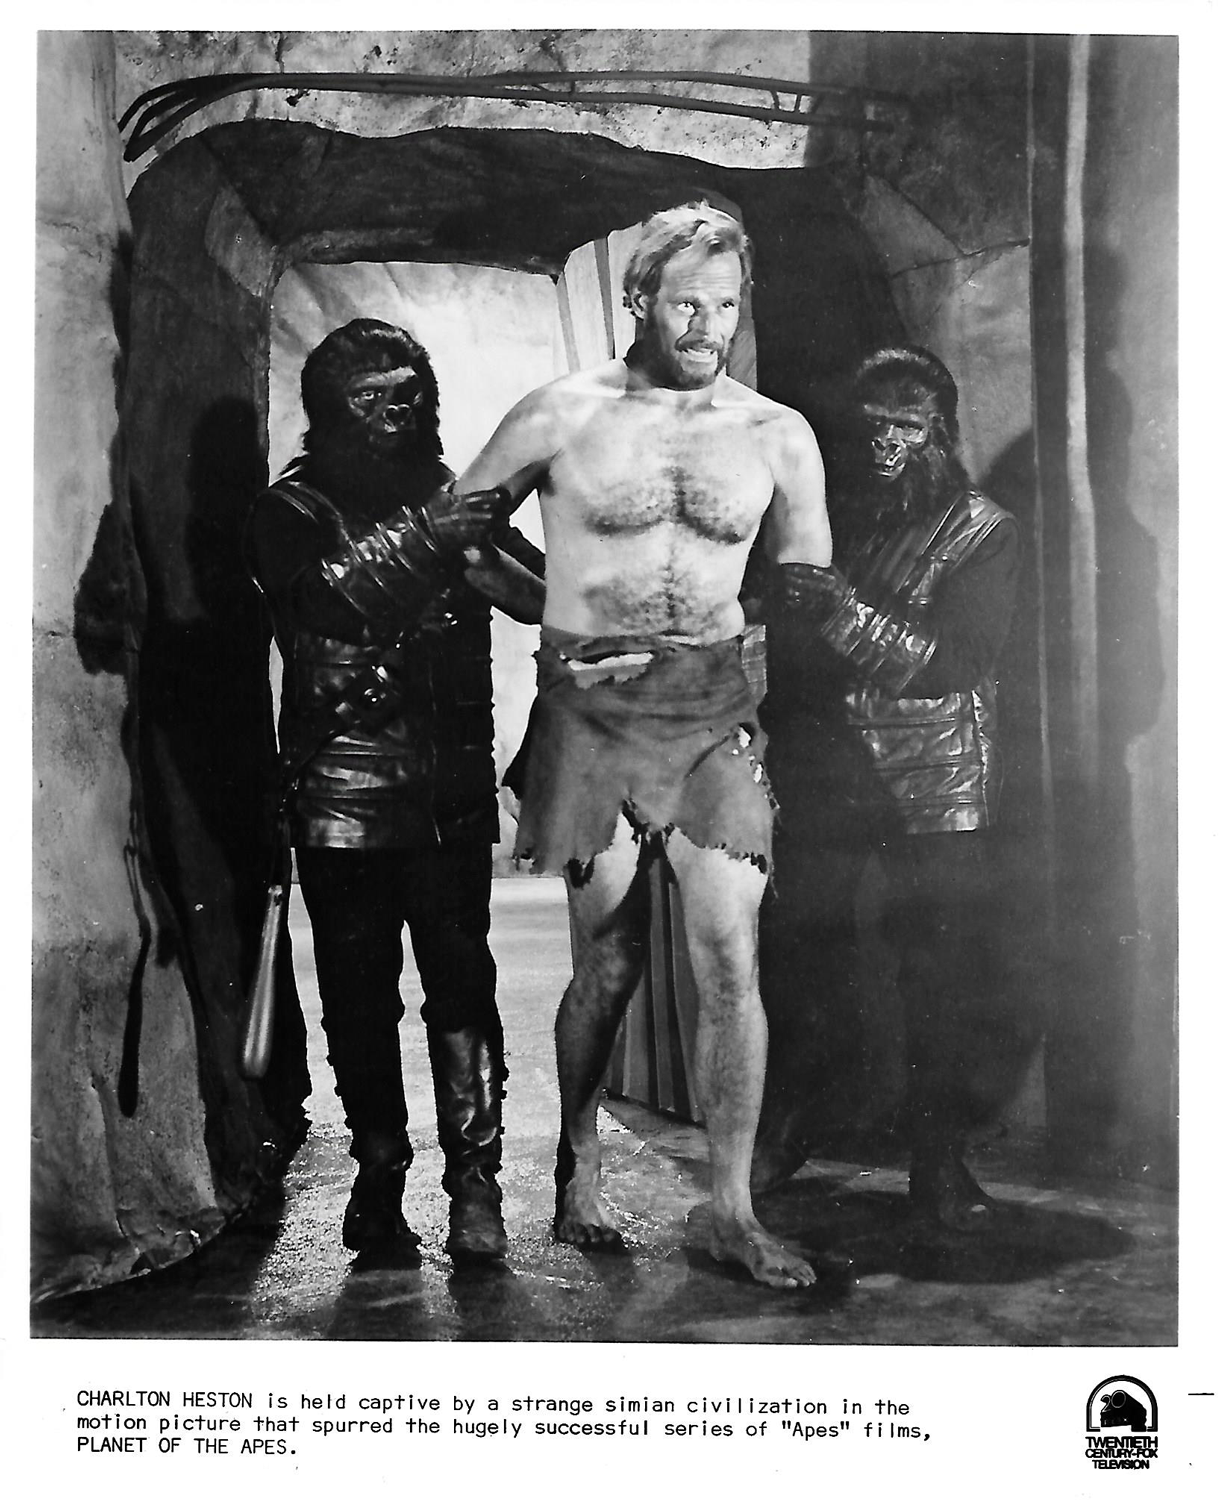  Charlton Heston is held captive by a strange simian civilization in  Planet of the Apes  